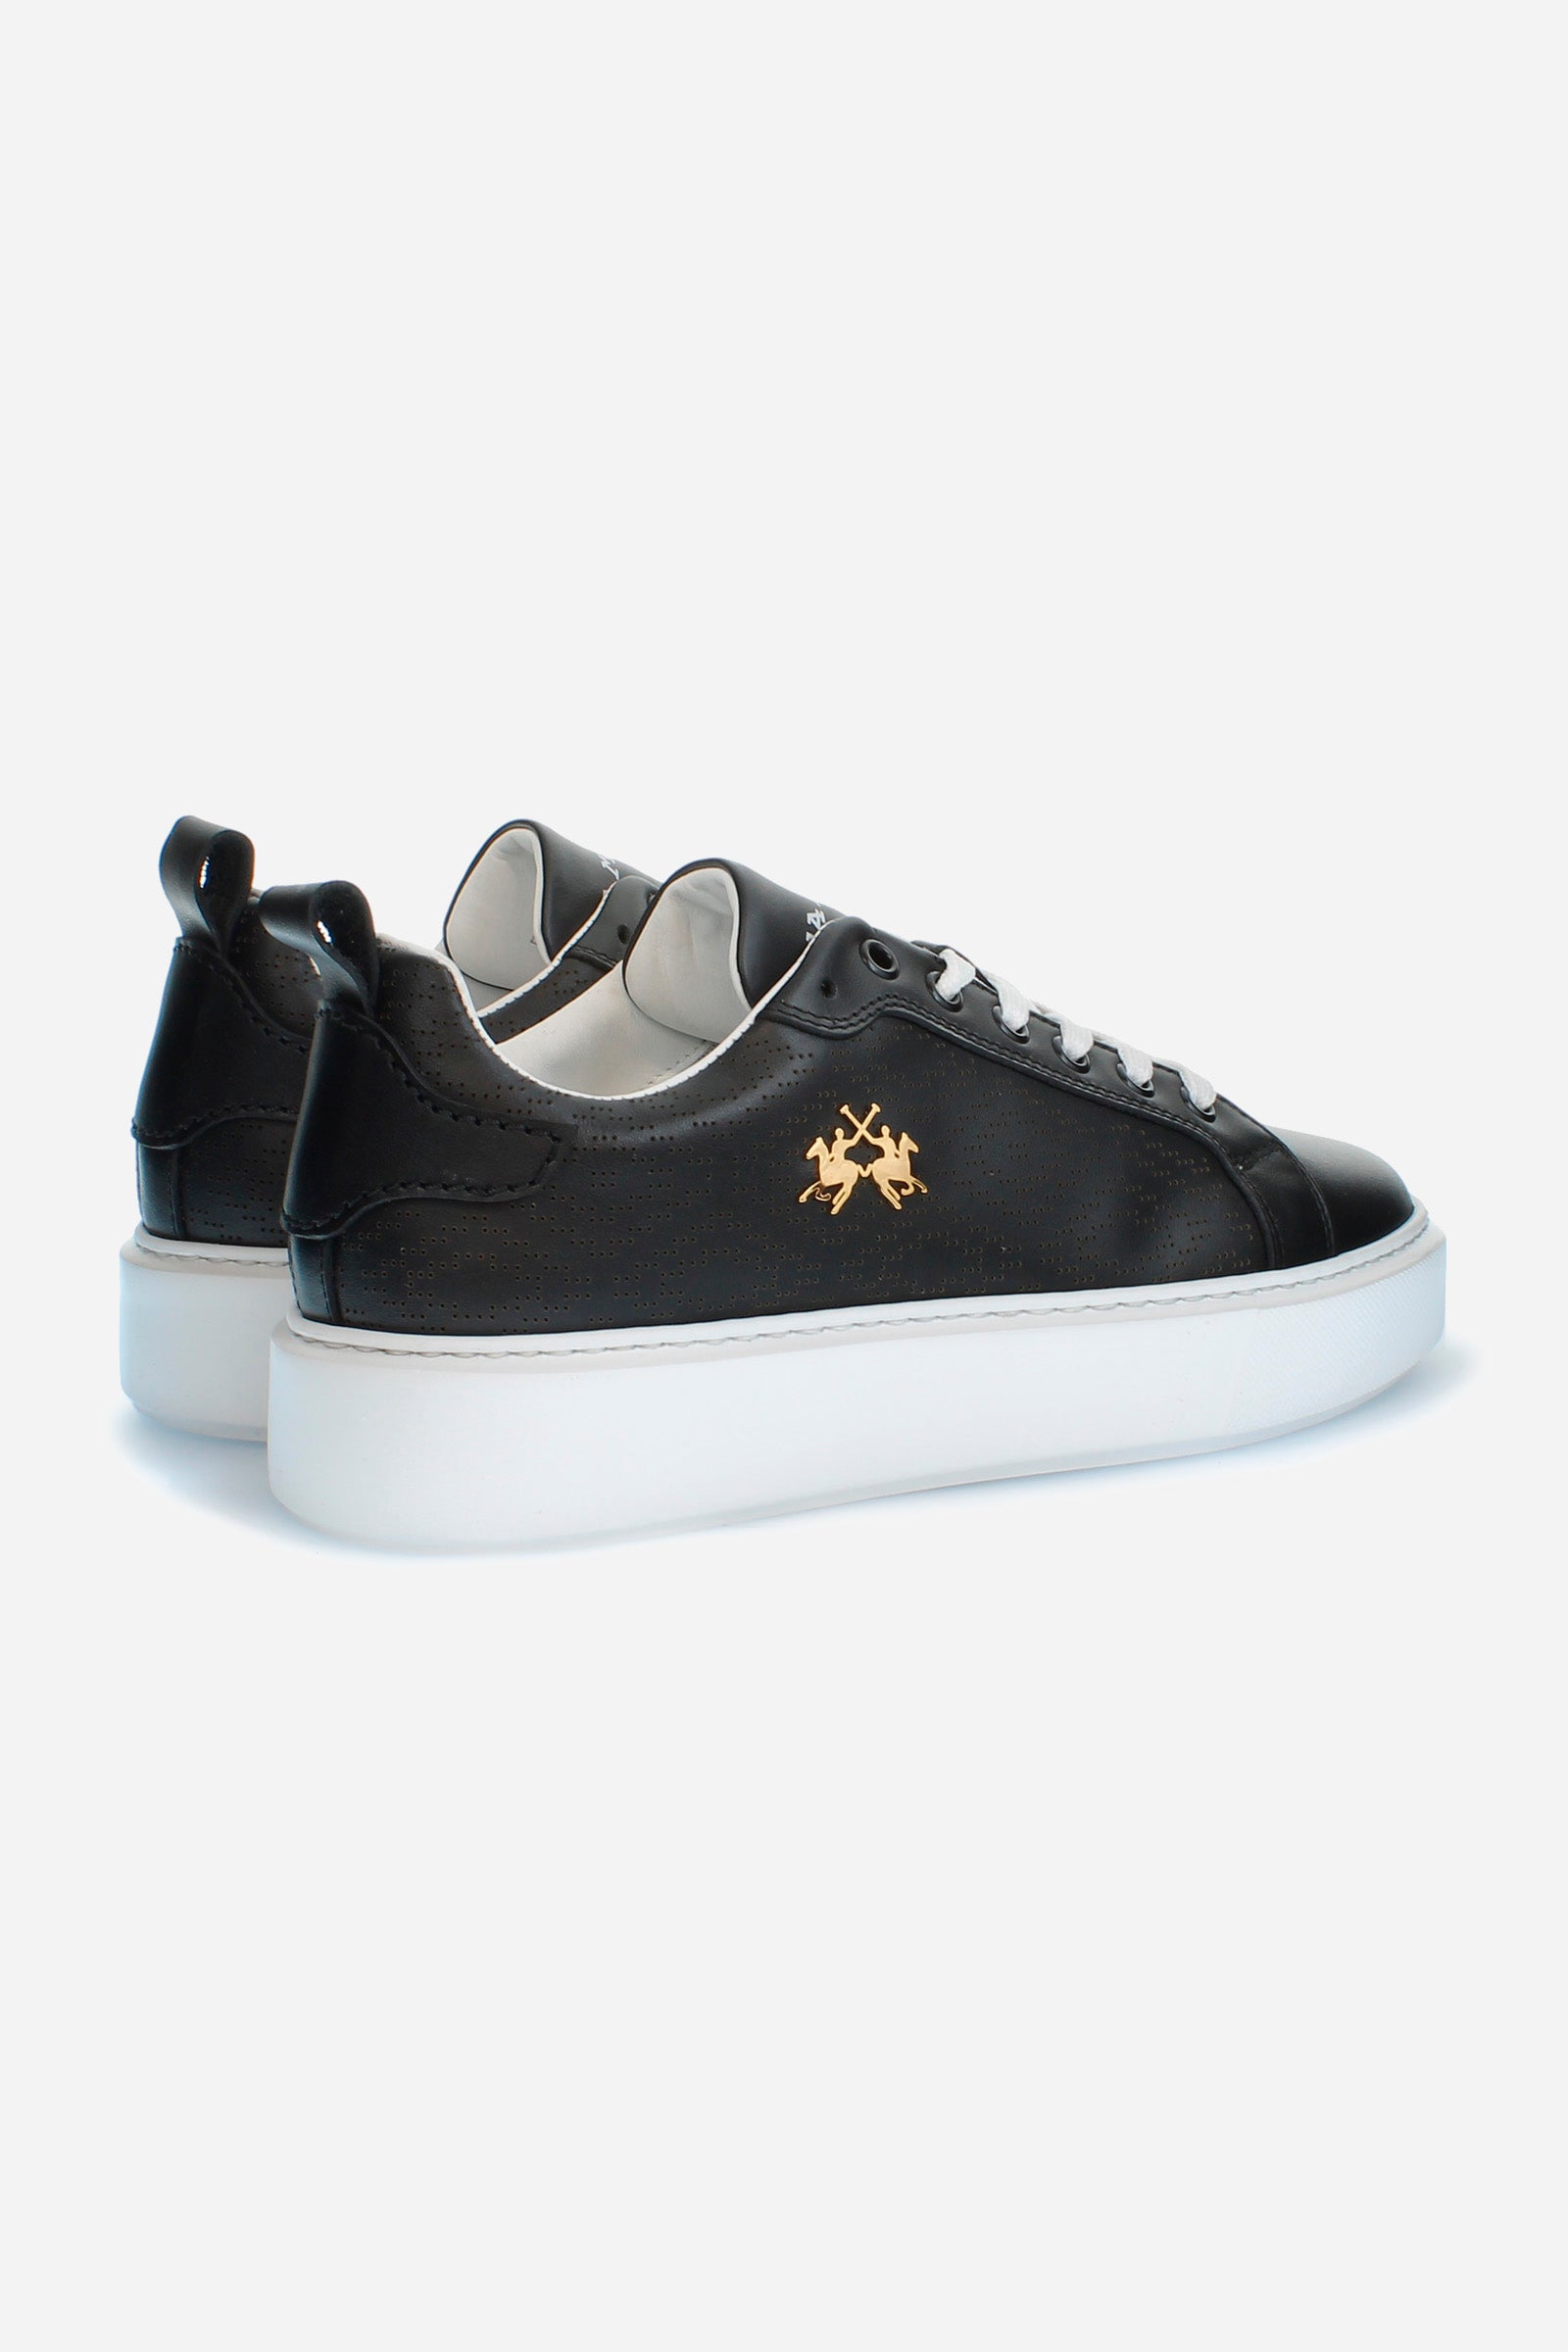 Women's trainers in perforated leather